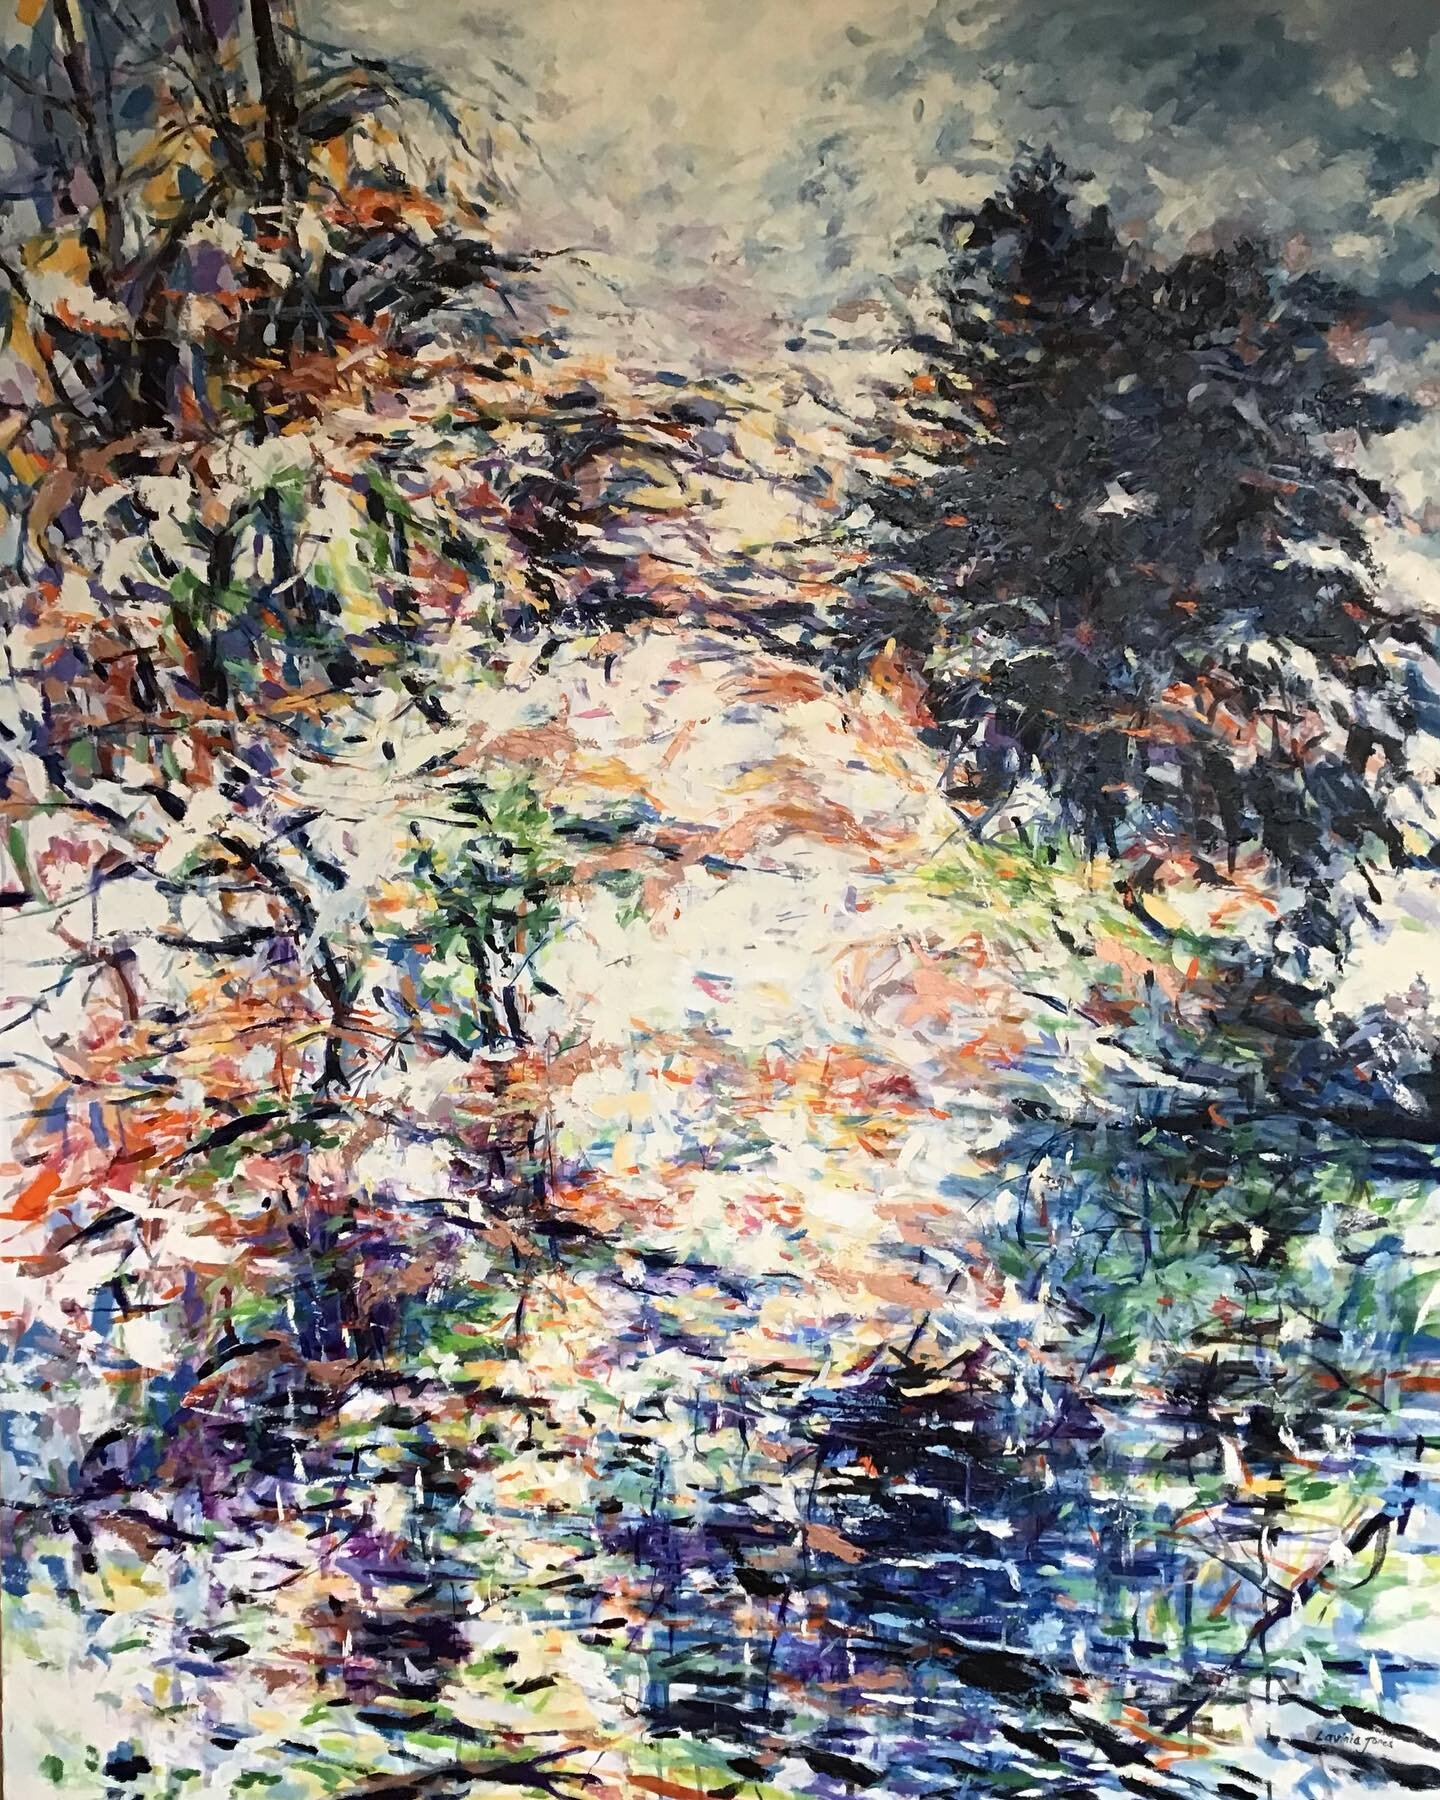 Shimmering, oil on canvas 48 x 60 inches